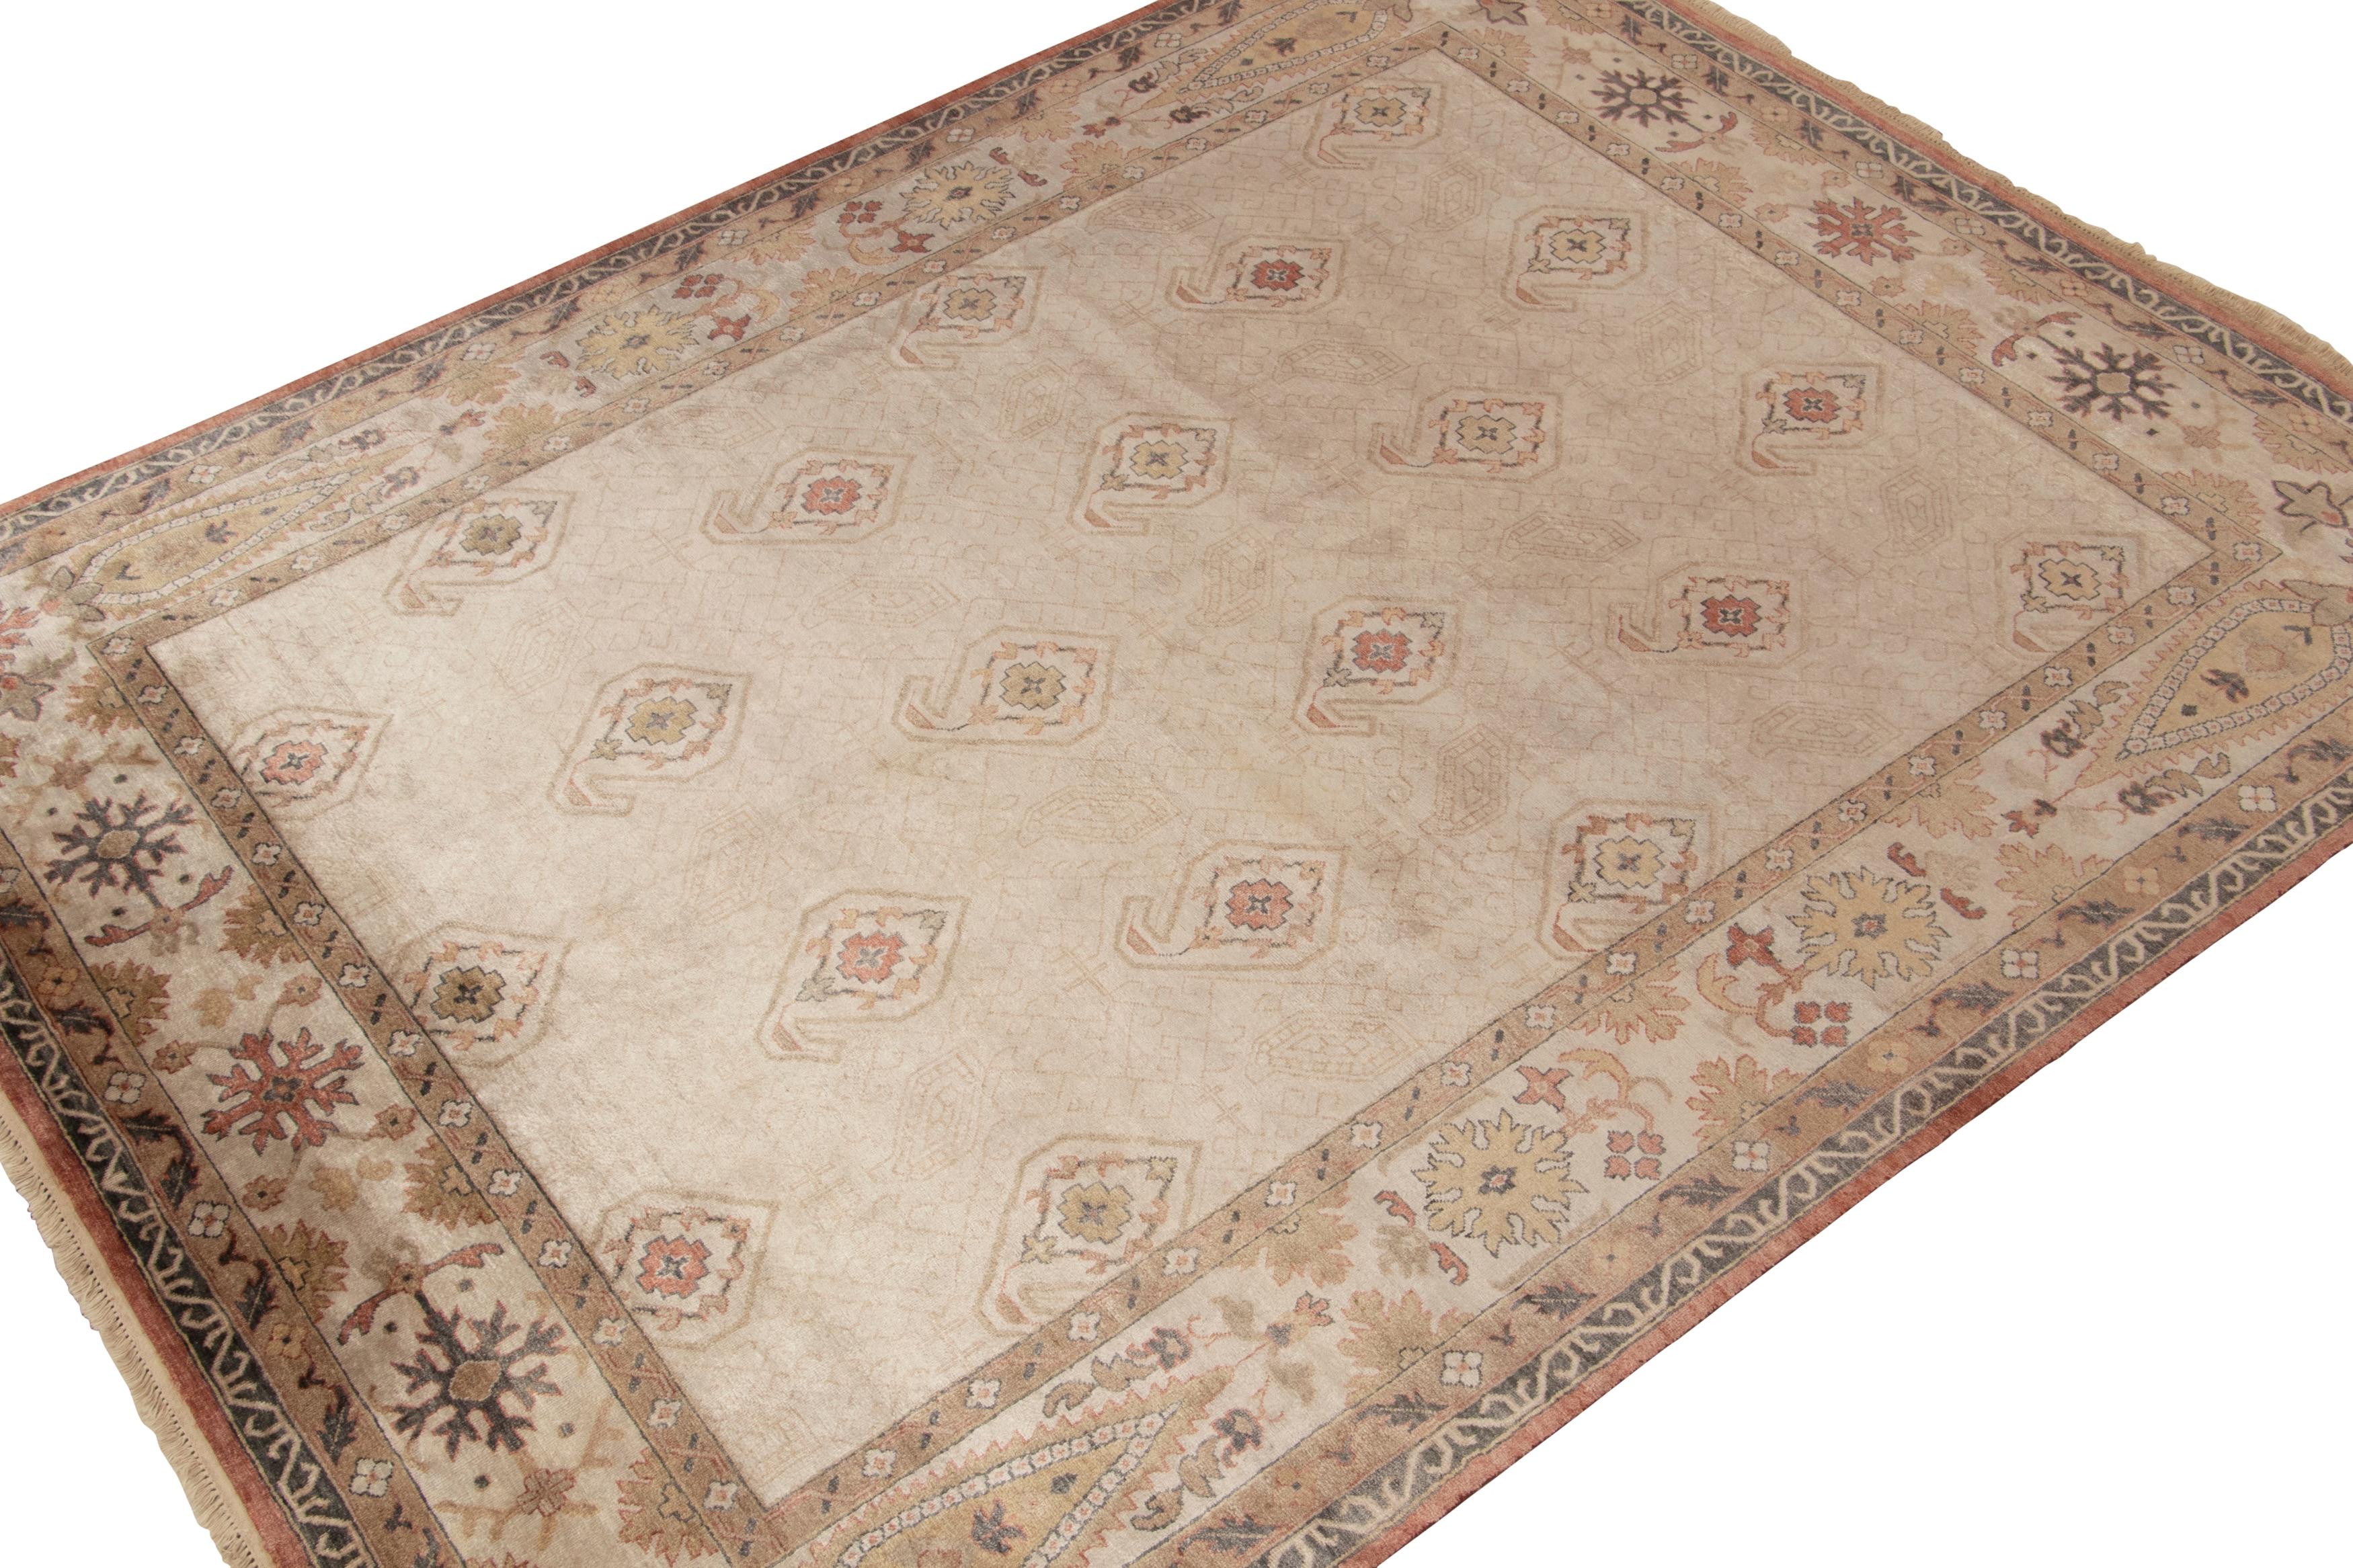 Indian Rug & Kilim’s Classic style rug in Off-White with Beige-Brown Floral Patterns  For Sale